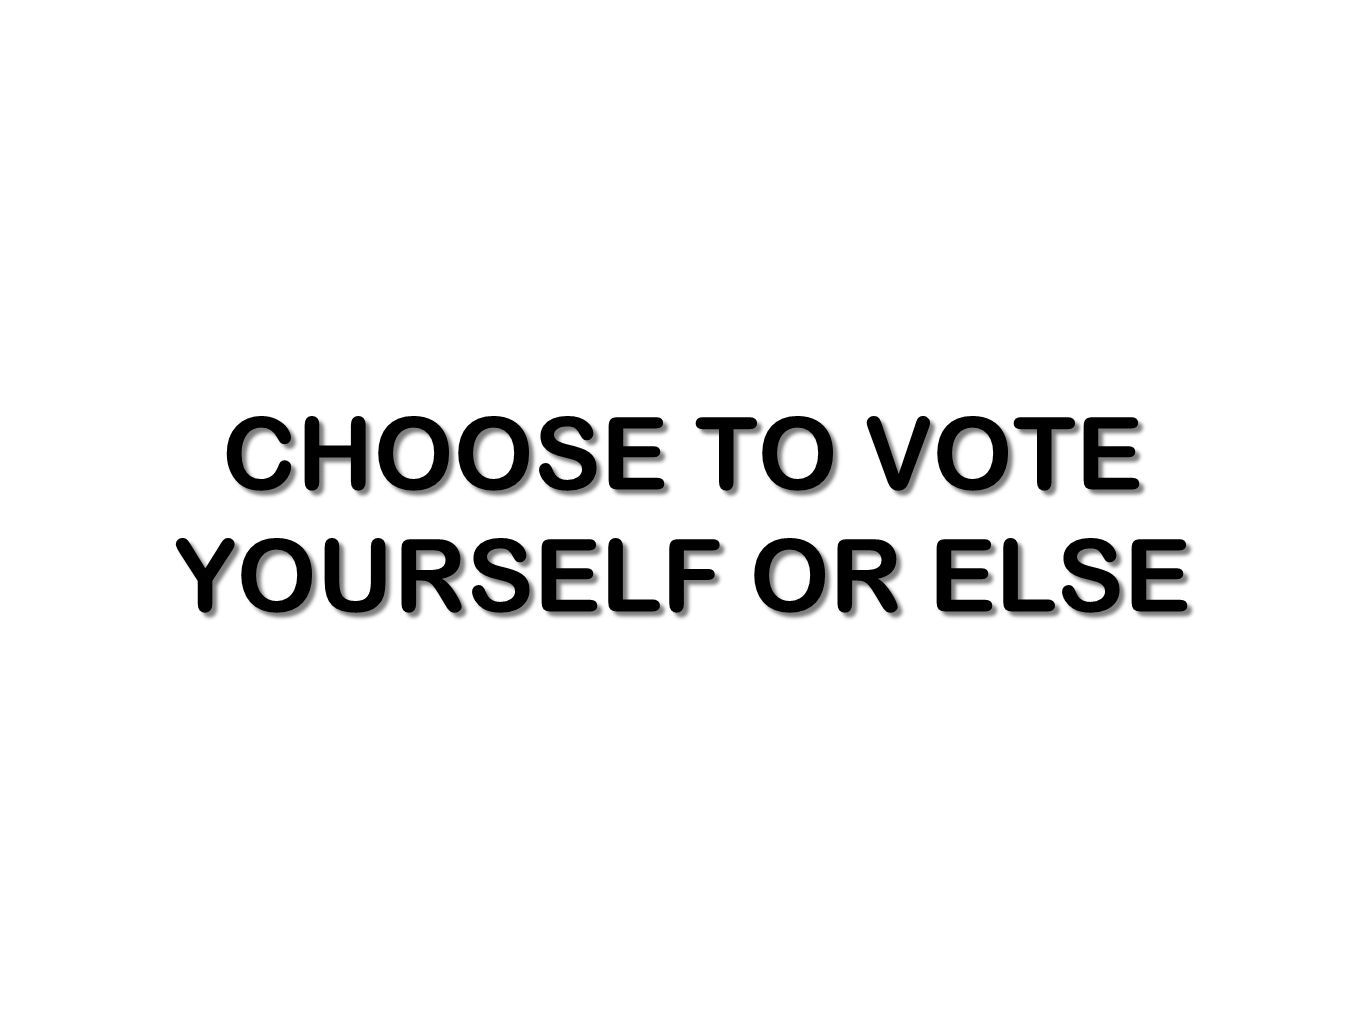 CHOOSE TO VOTE YOURSELF OR ELSE